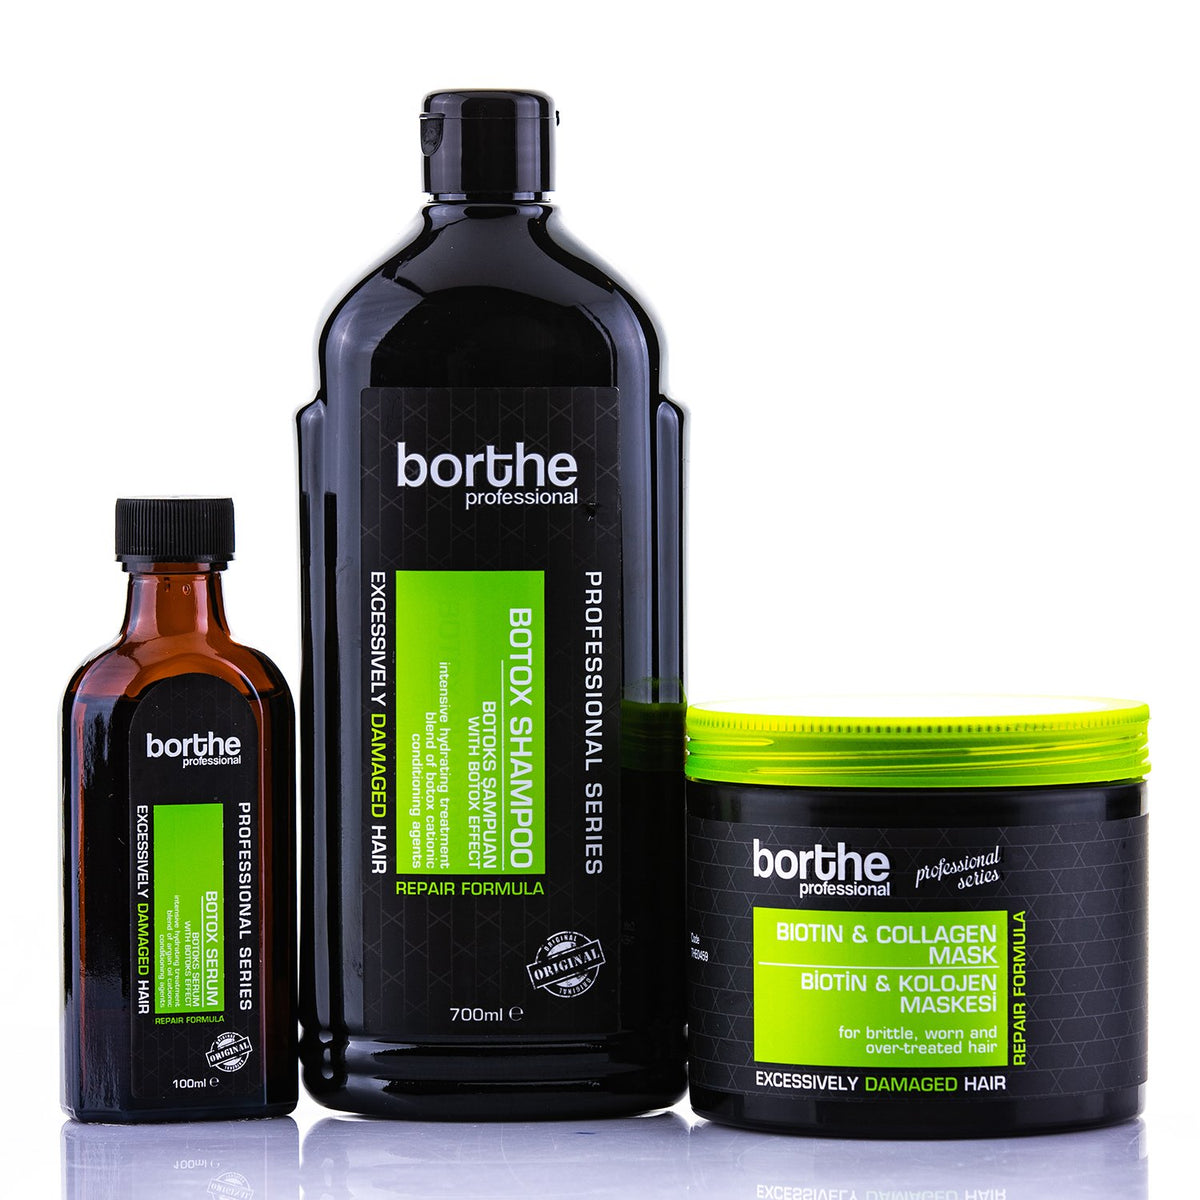 BORTHE Hair Mask With Botox Effect Repair Formula Intensive Hydrating Treatment - Excessively Damaged Hair 500ml